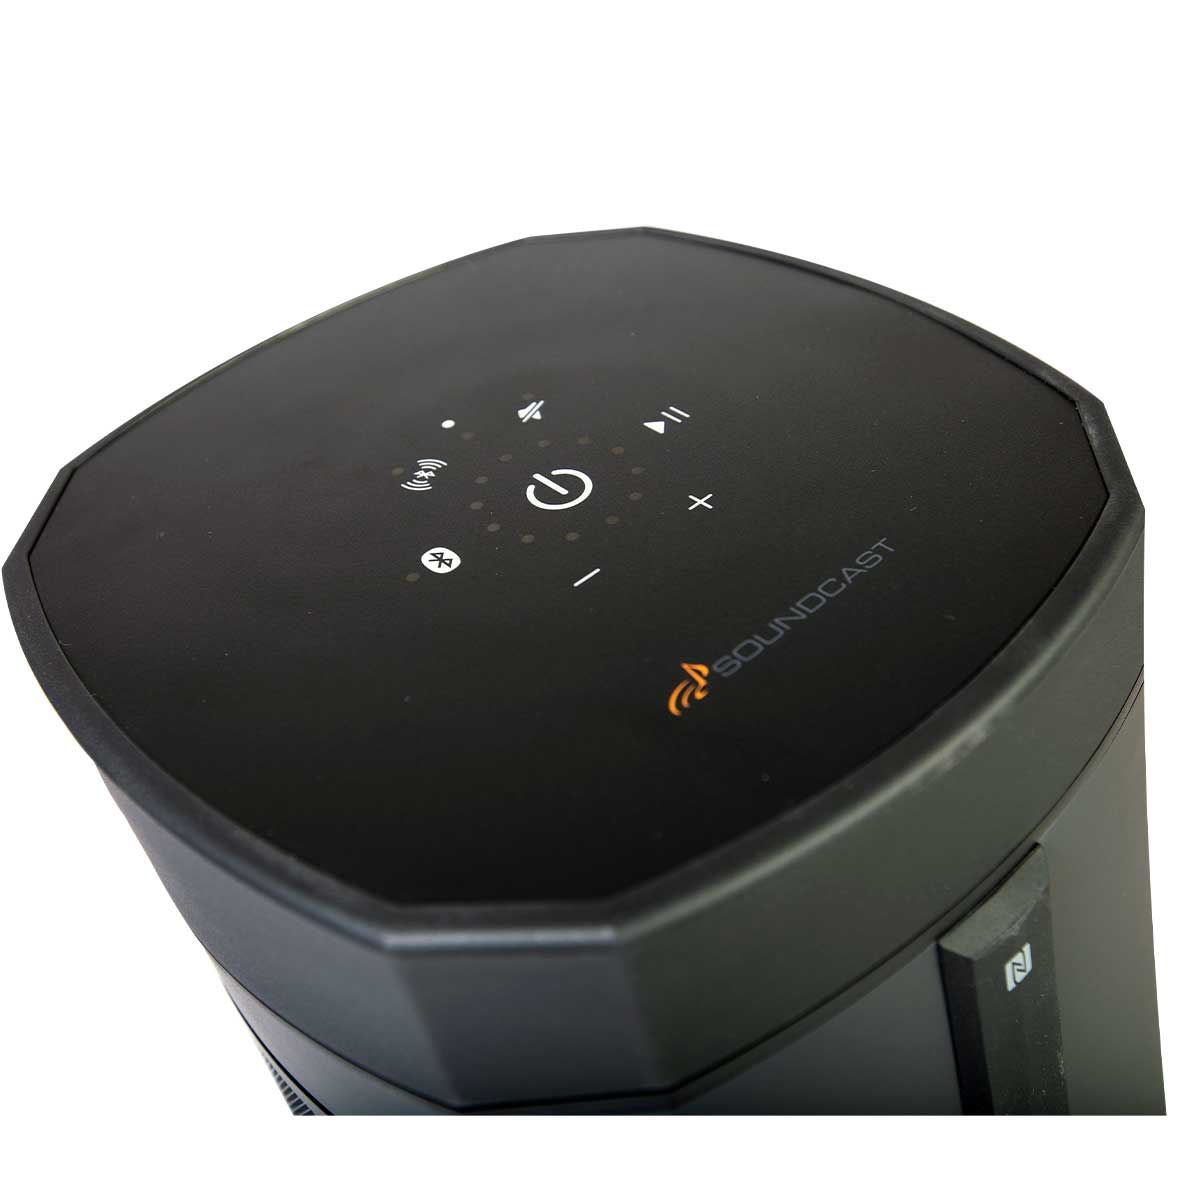 Close-up shot of the Soundcast VG5 Portable Waterproof Bluetooth Speaker's capacitive touch control panel.